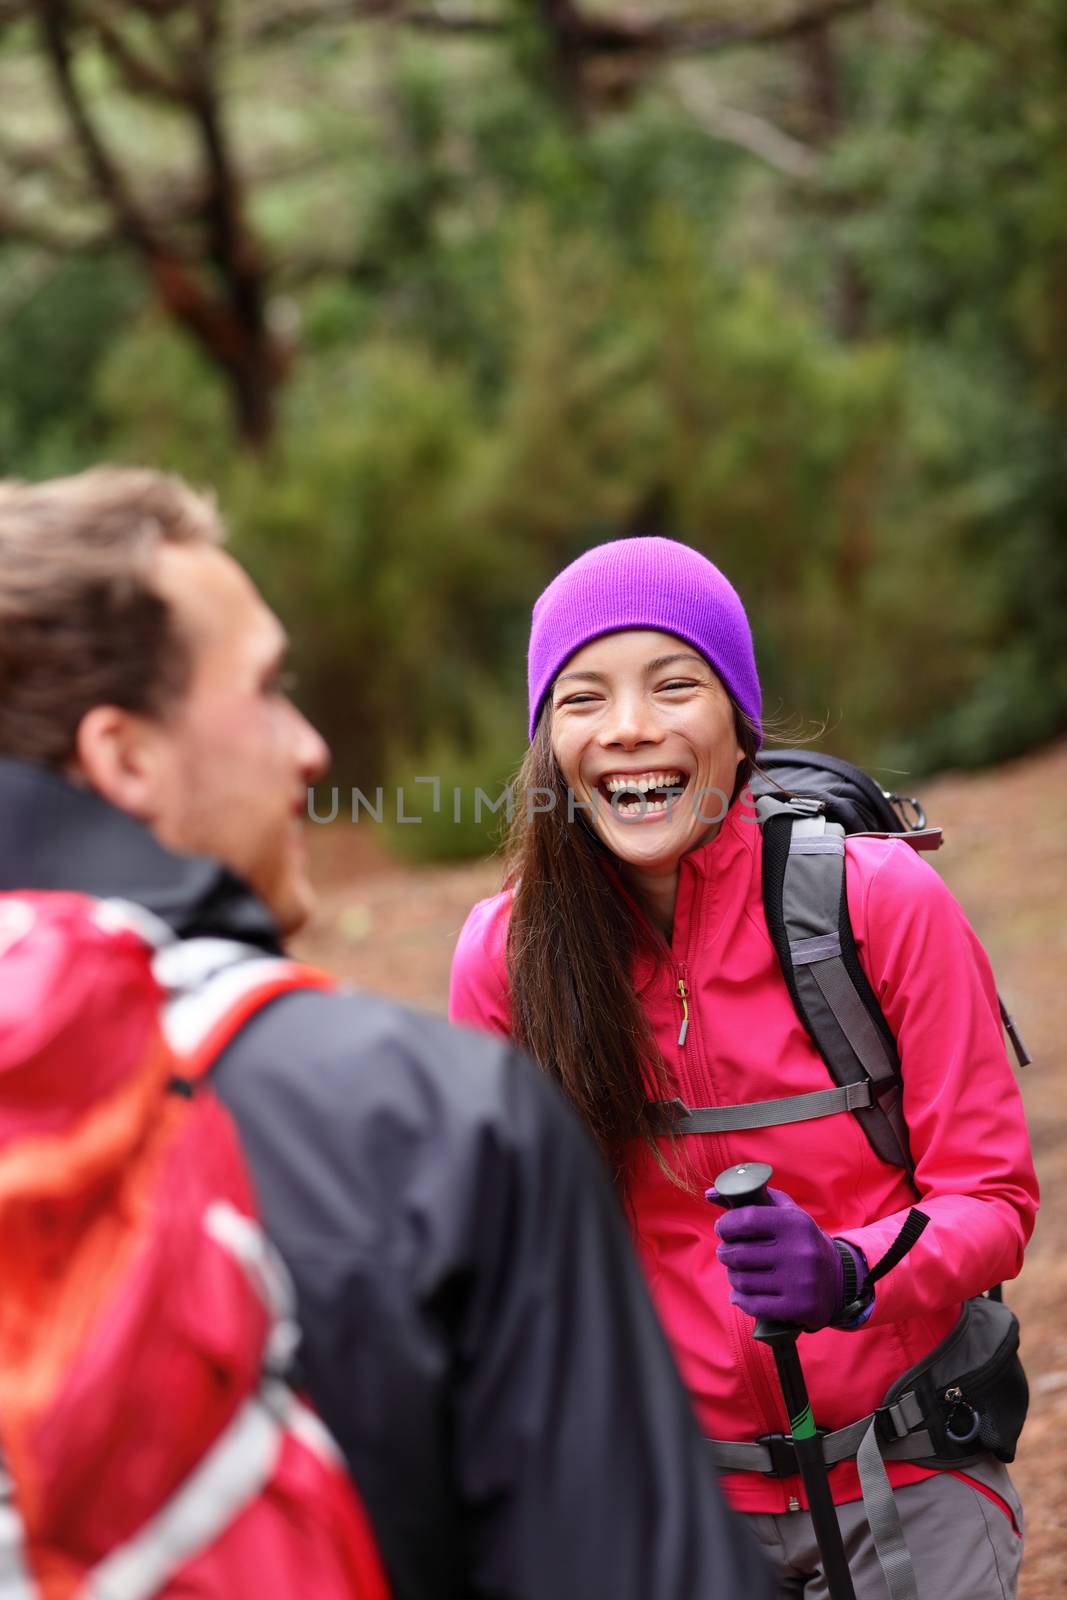 Couple having fun laughing hiking in forest by Maridav